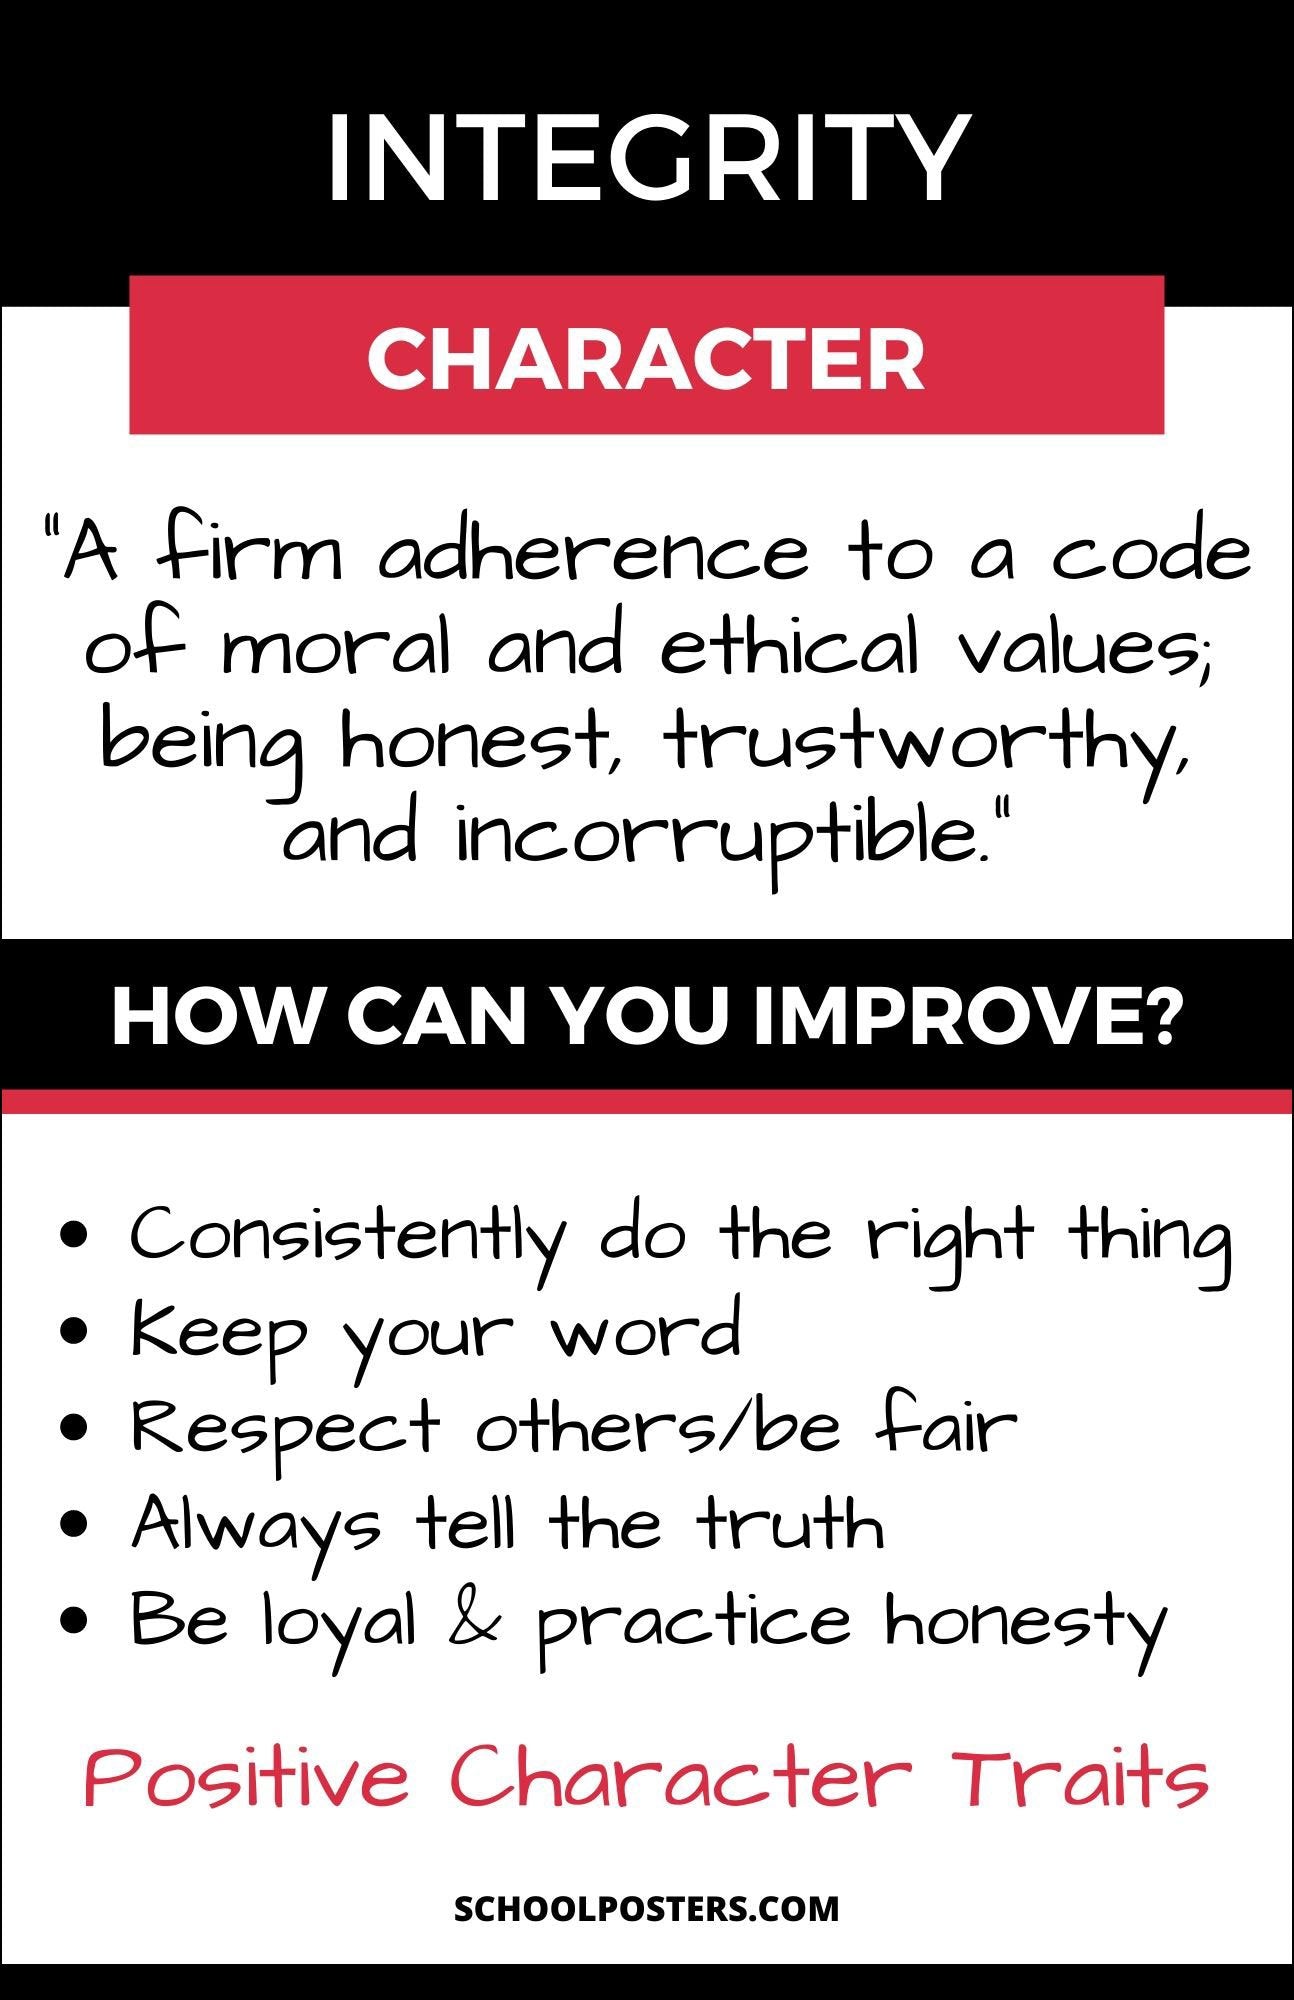 trustworthiness posters